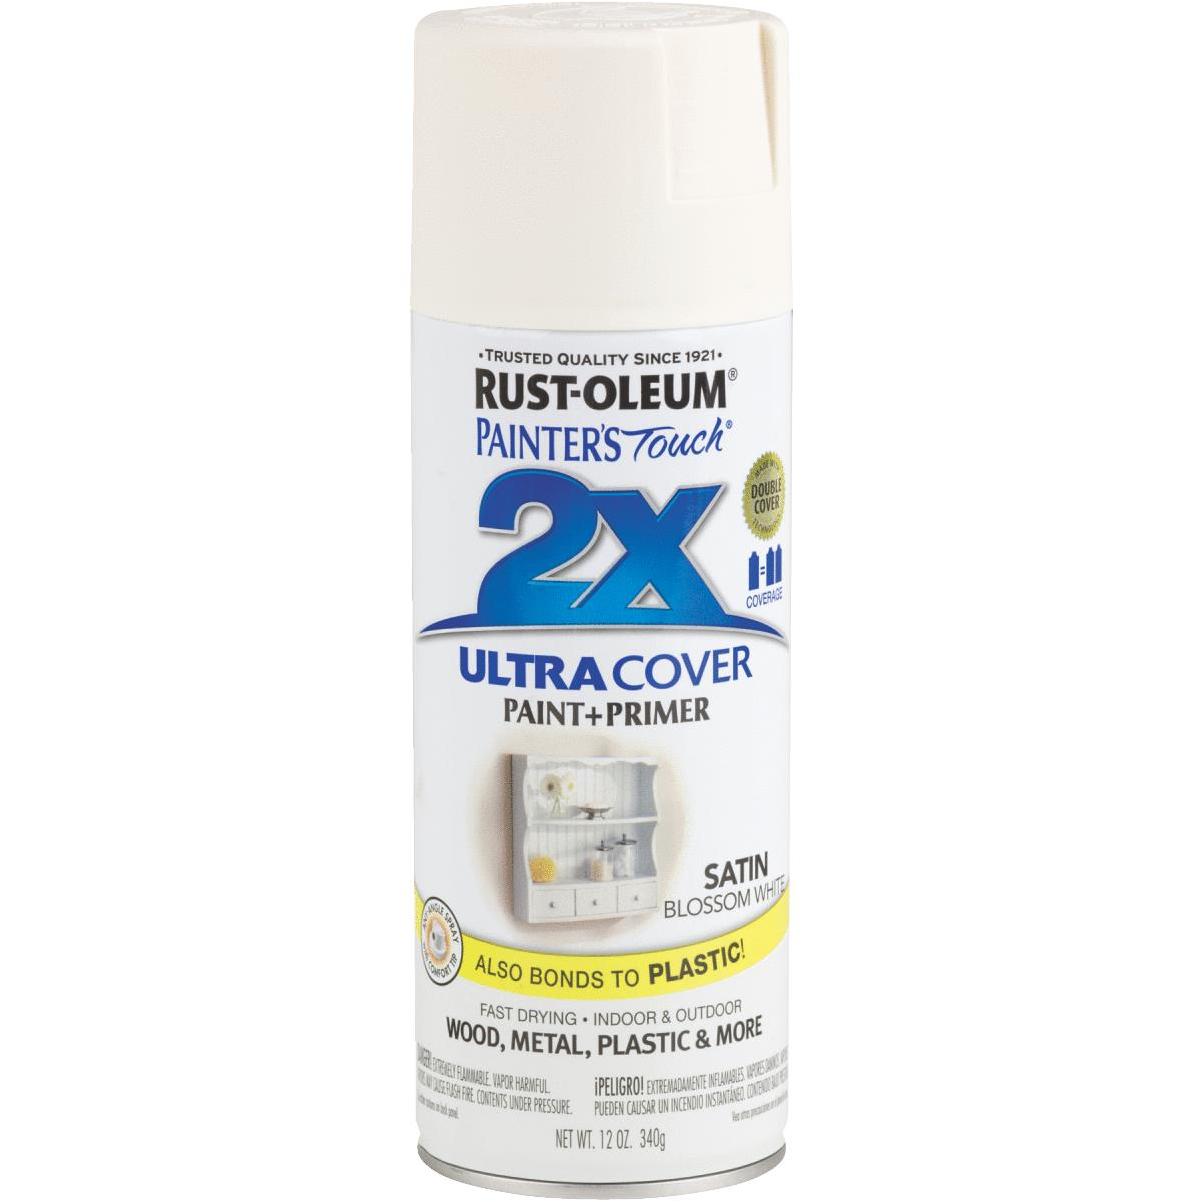 Rust-Oleum 12 oz. White Painter's Touch 2x Ultra Cover Spray Paint, Flat